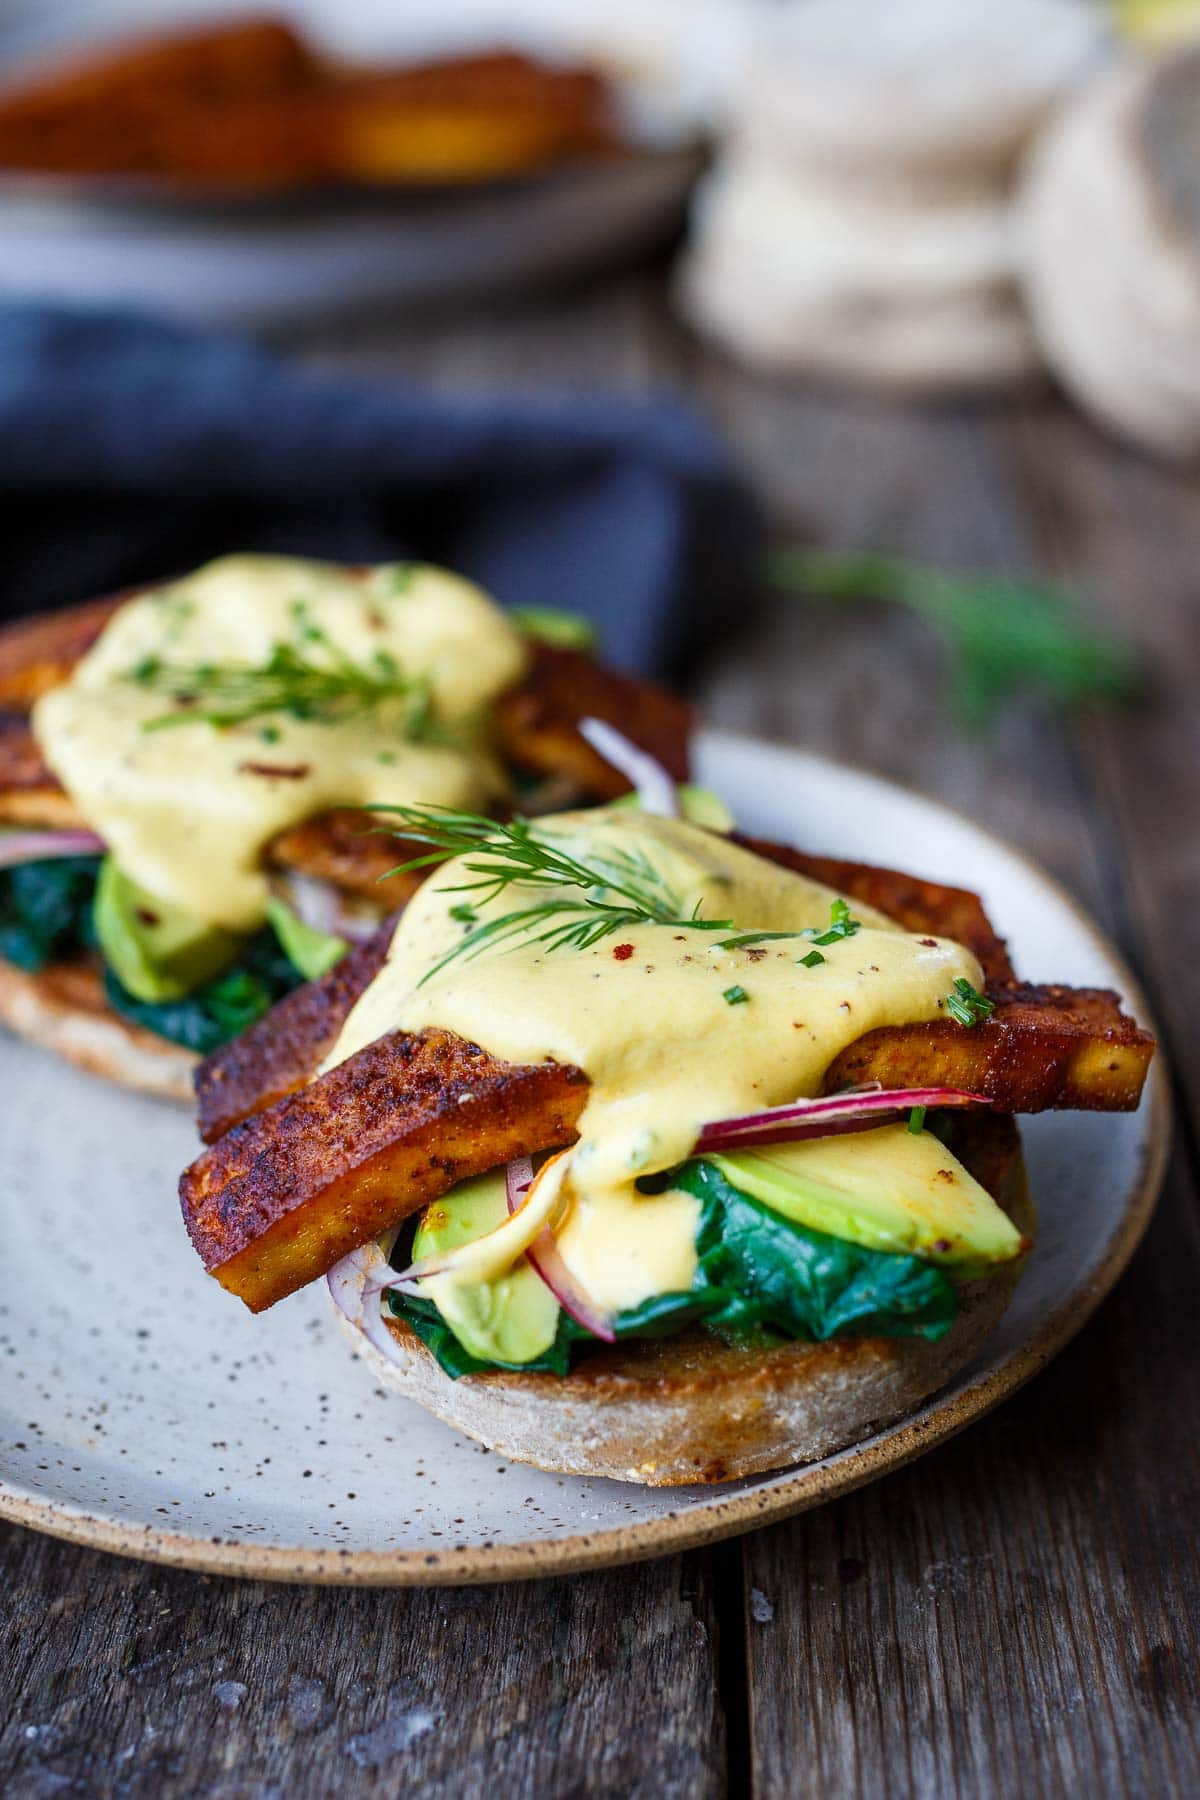 vegan eggs benedict with vegan hollandaise, tofu bacon, red onion, avocado, wilted spinach on toasted english muffin.